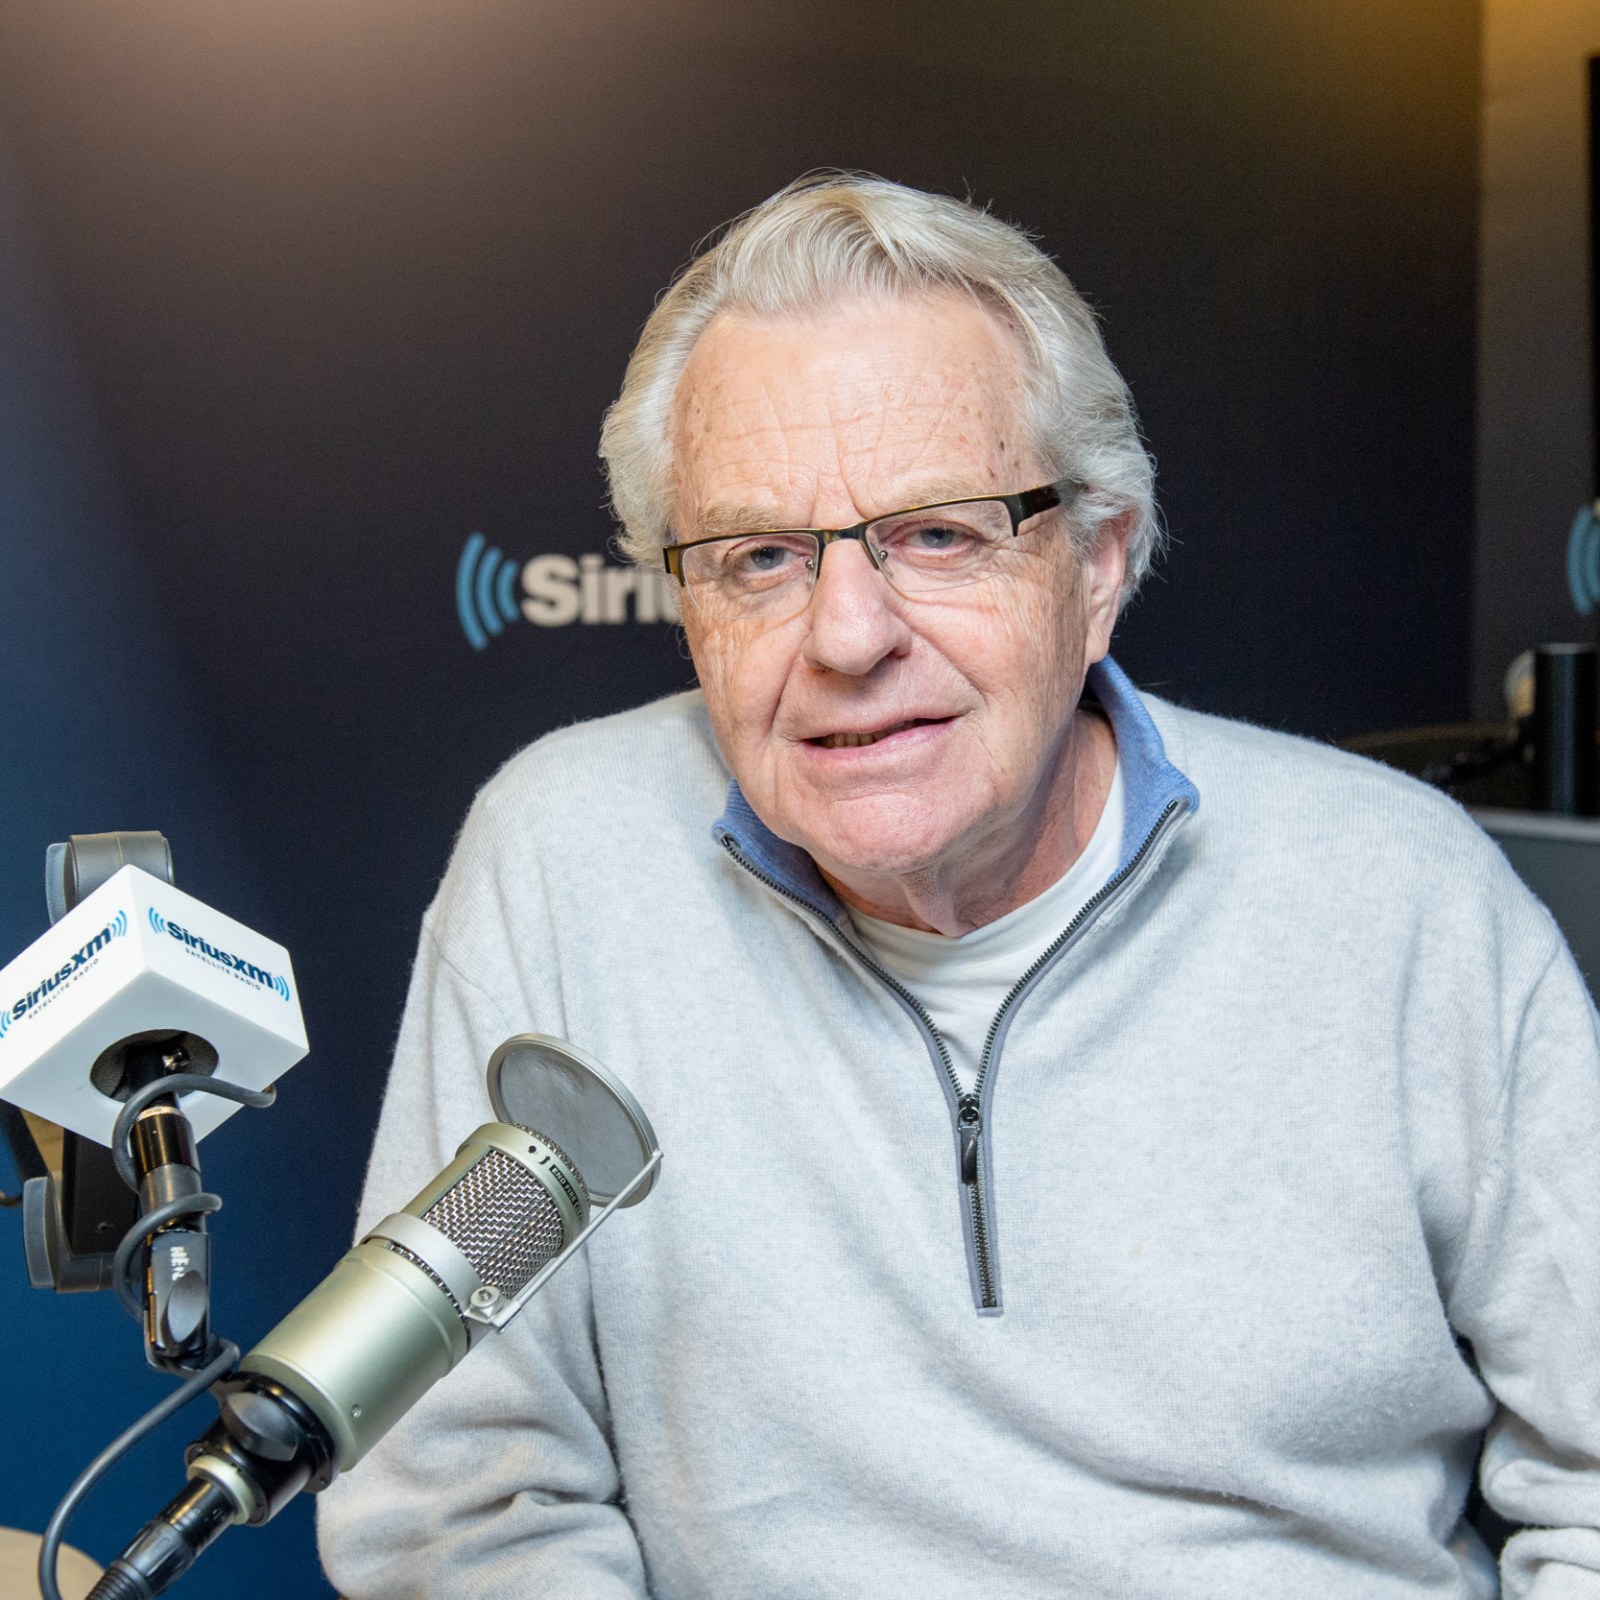 Jerry Springer Says His Show Helped People Accept Donald Trump